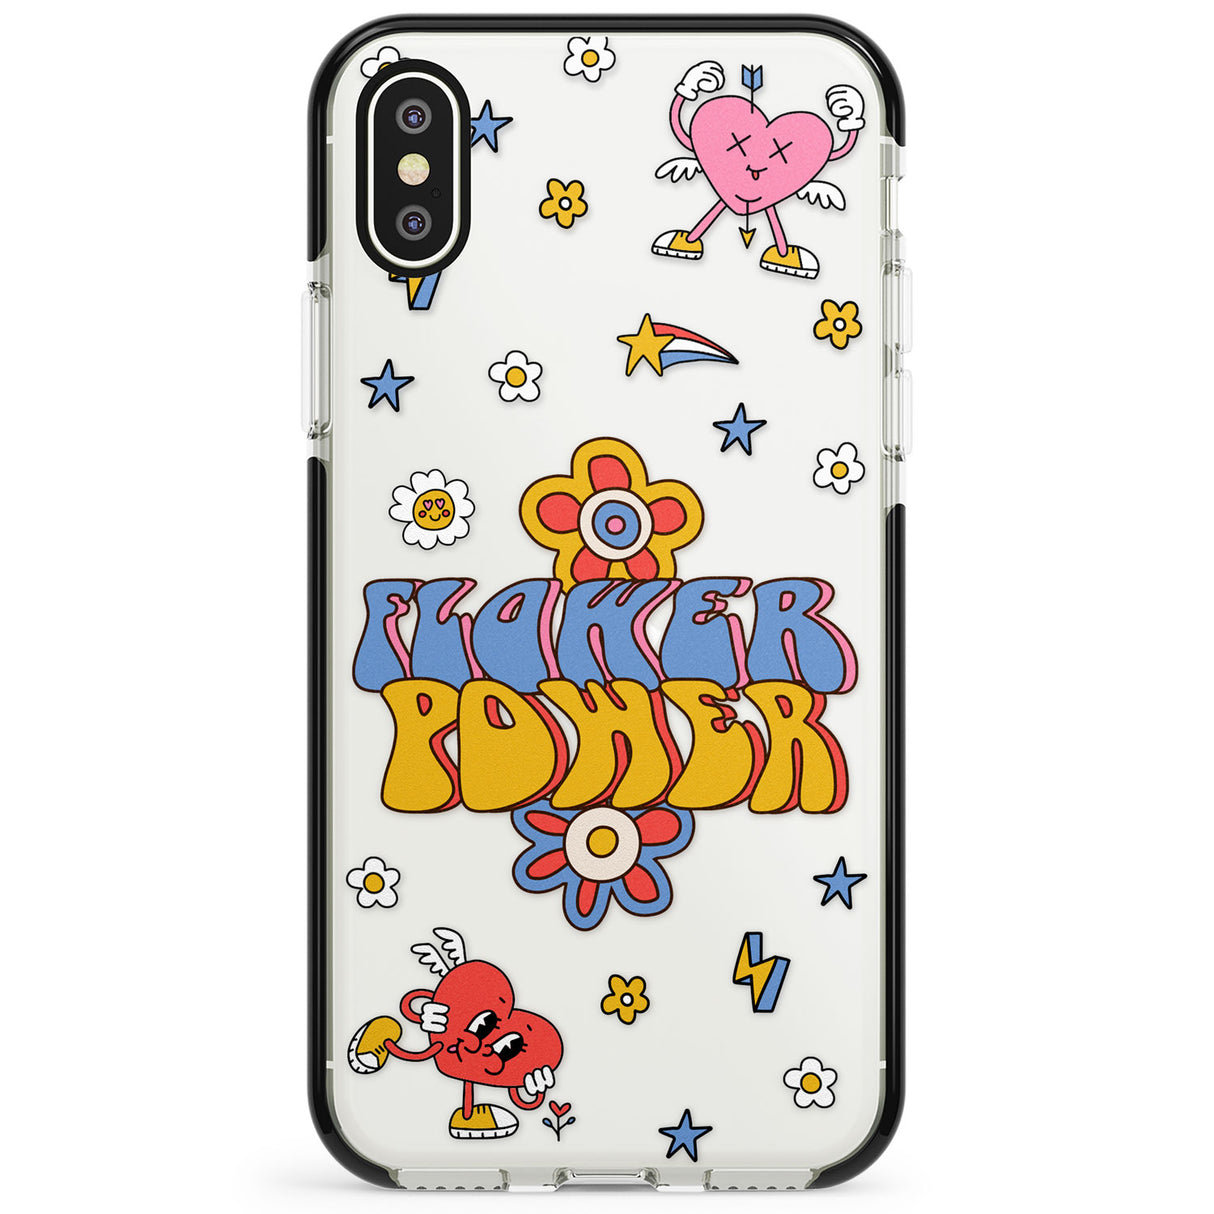 Flower Power Phone Case for iPhone X XS Max XR